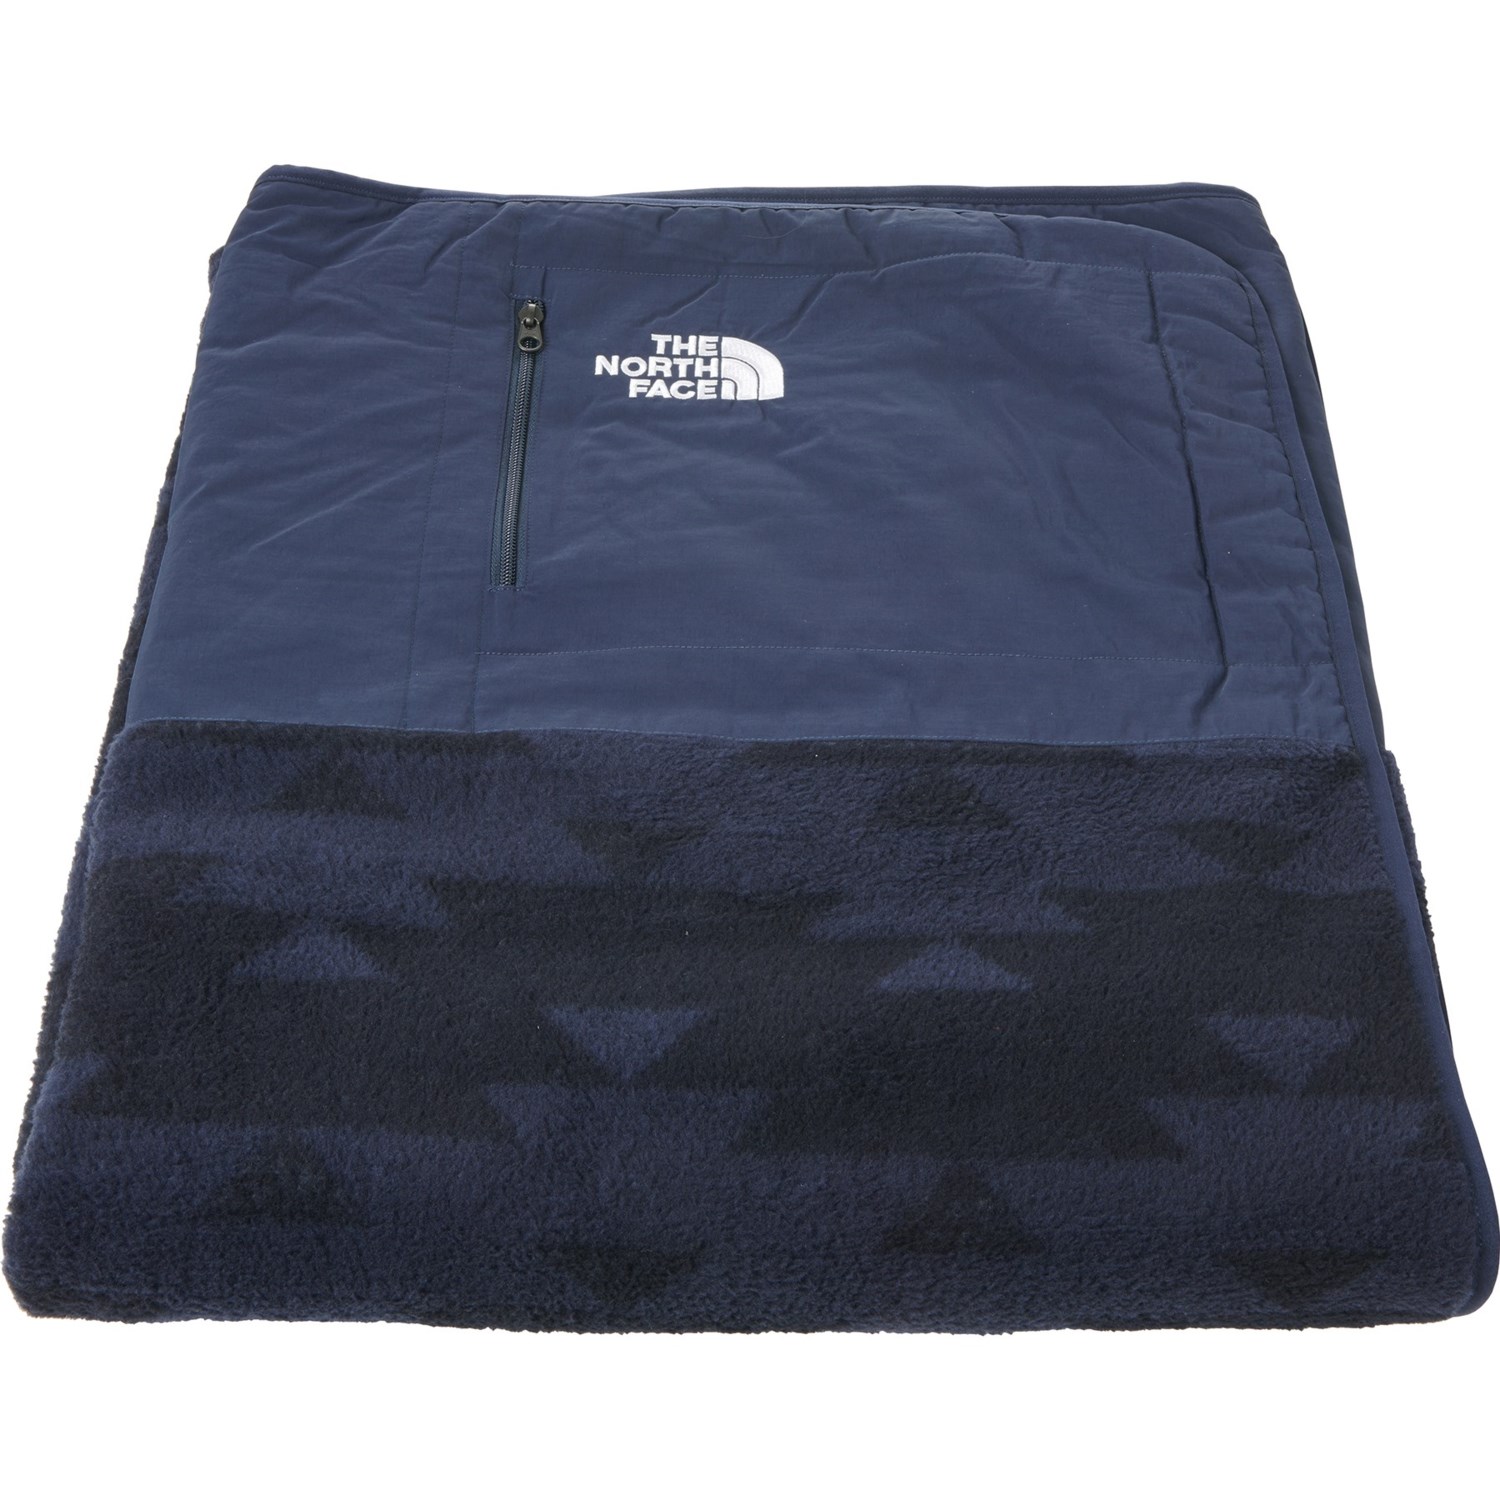 The North Face Dunraven Sherpa Blanket 